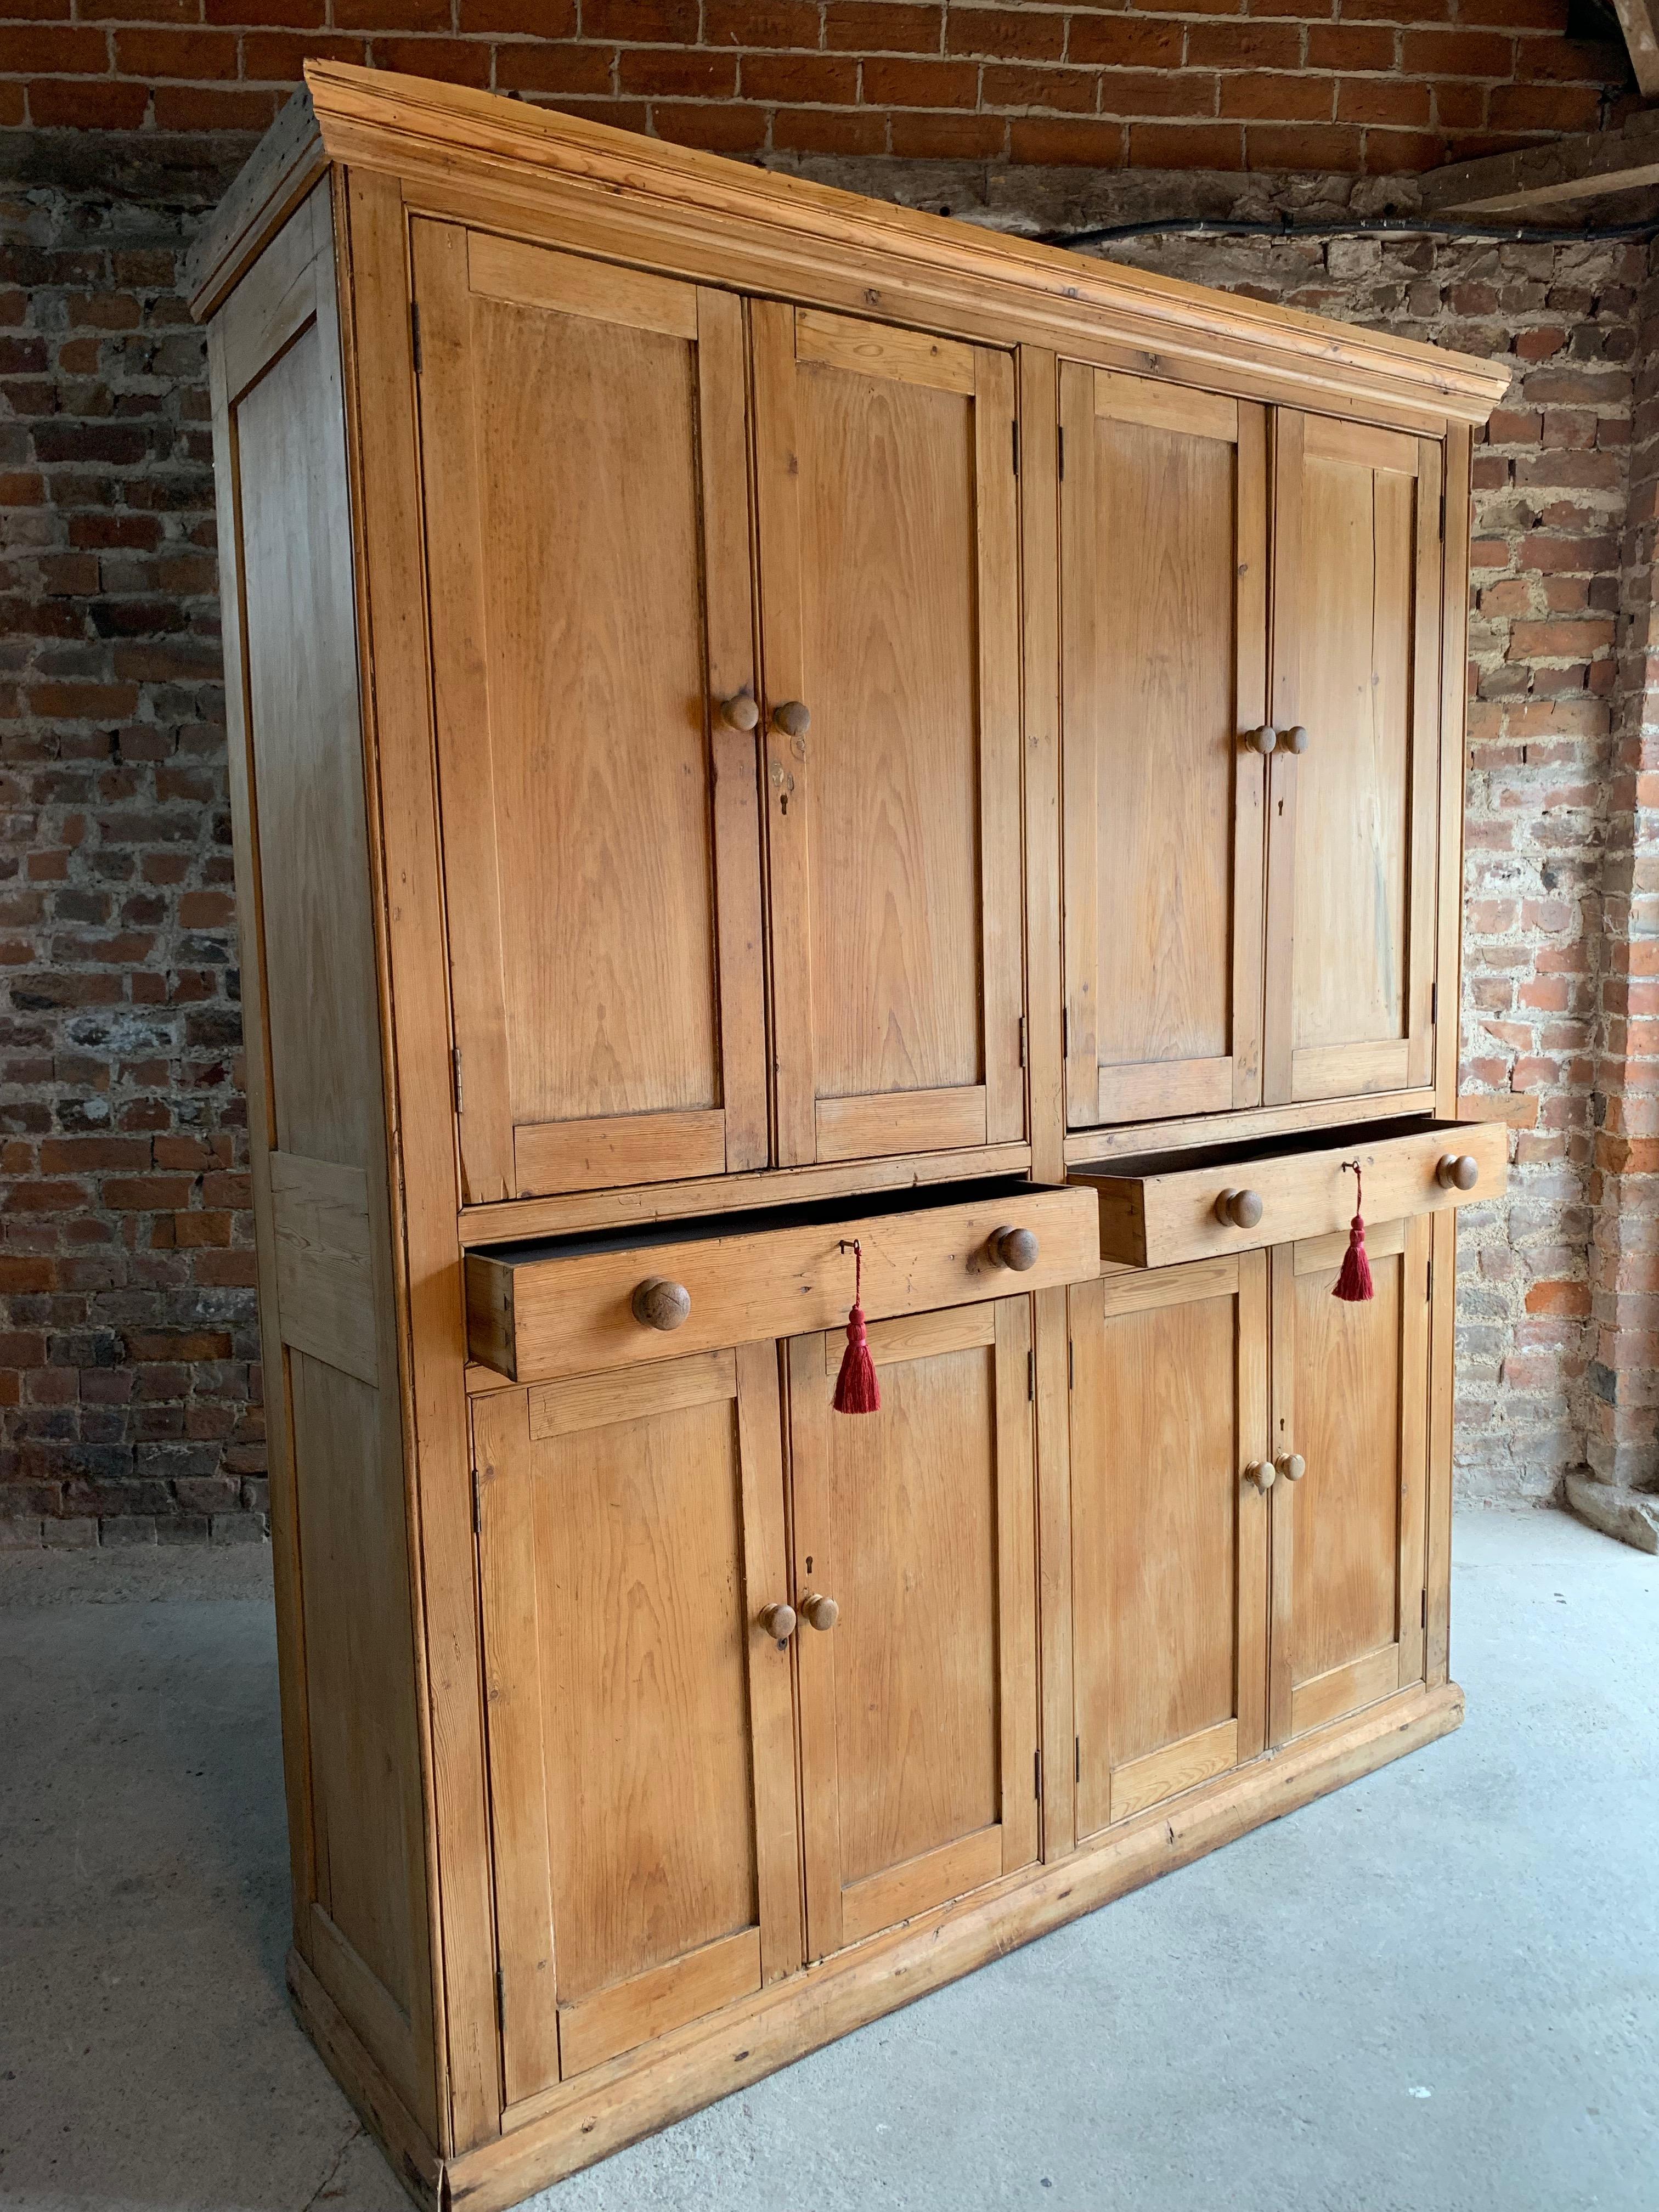 Victorian Pine Housekeepers Cupboard Pantry Antique 19th Century, circa 1890 In Fair Condition In Longdon, Tewkesbury